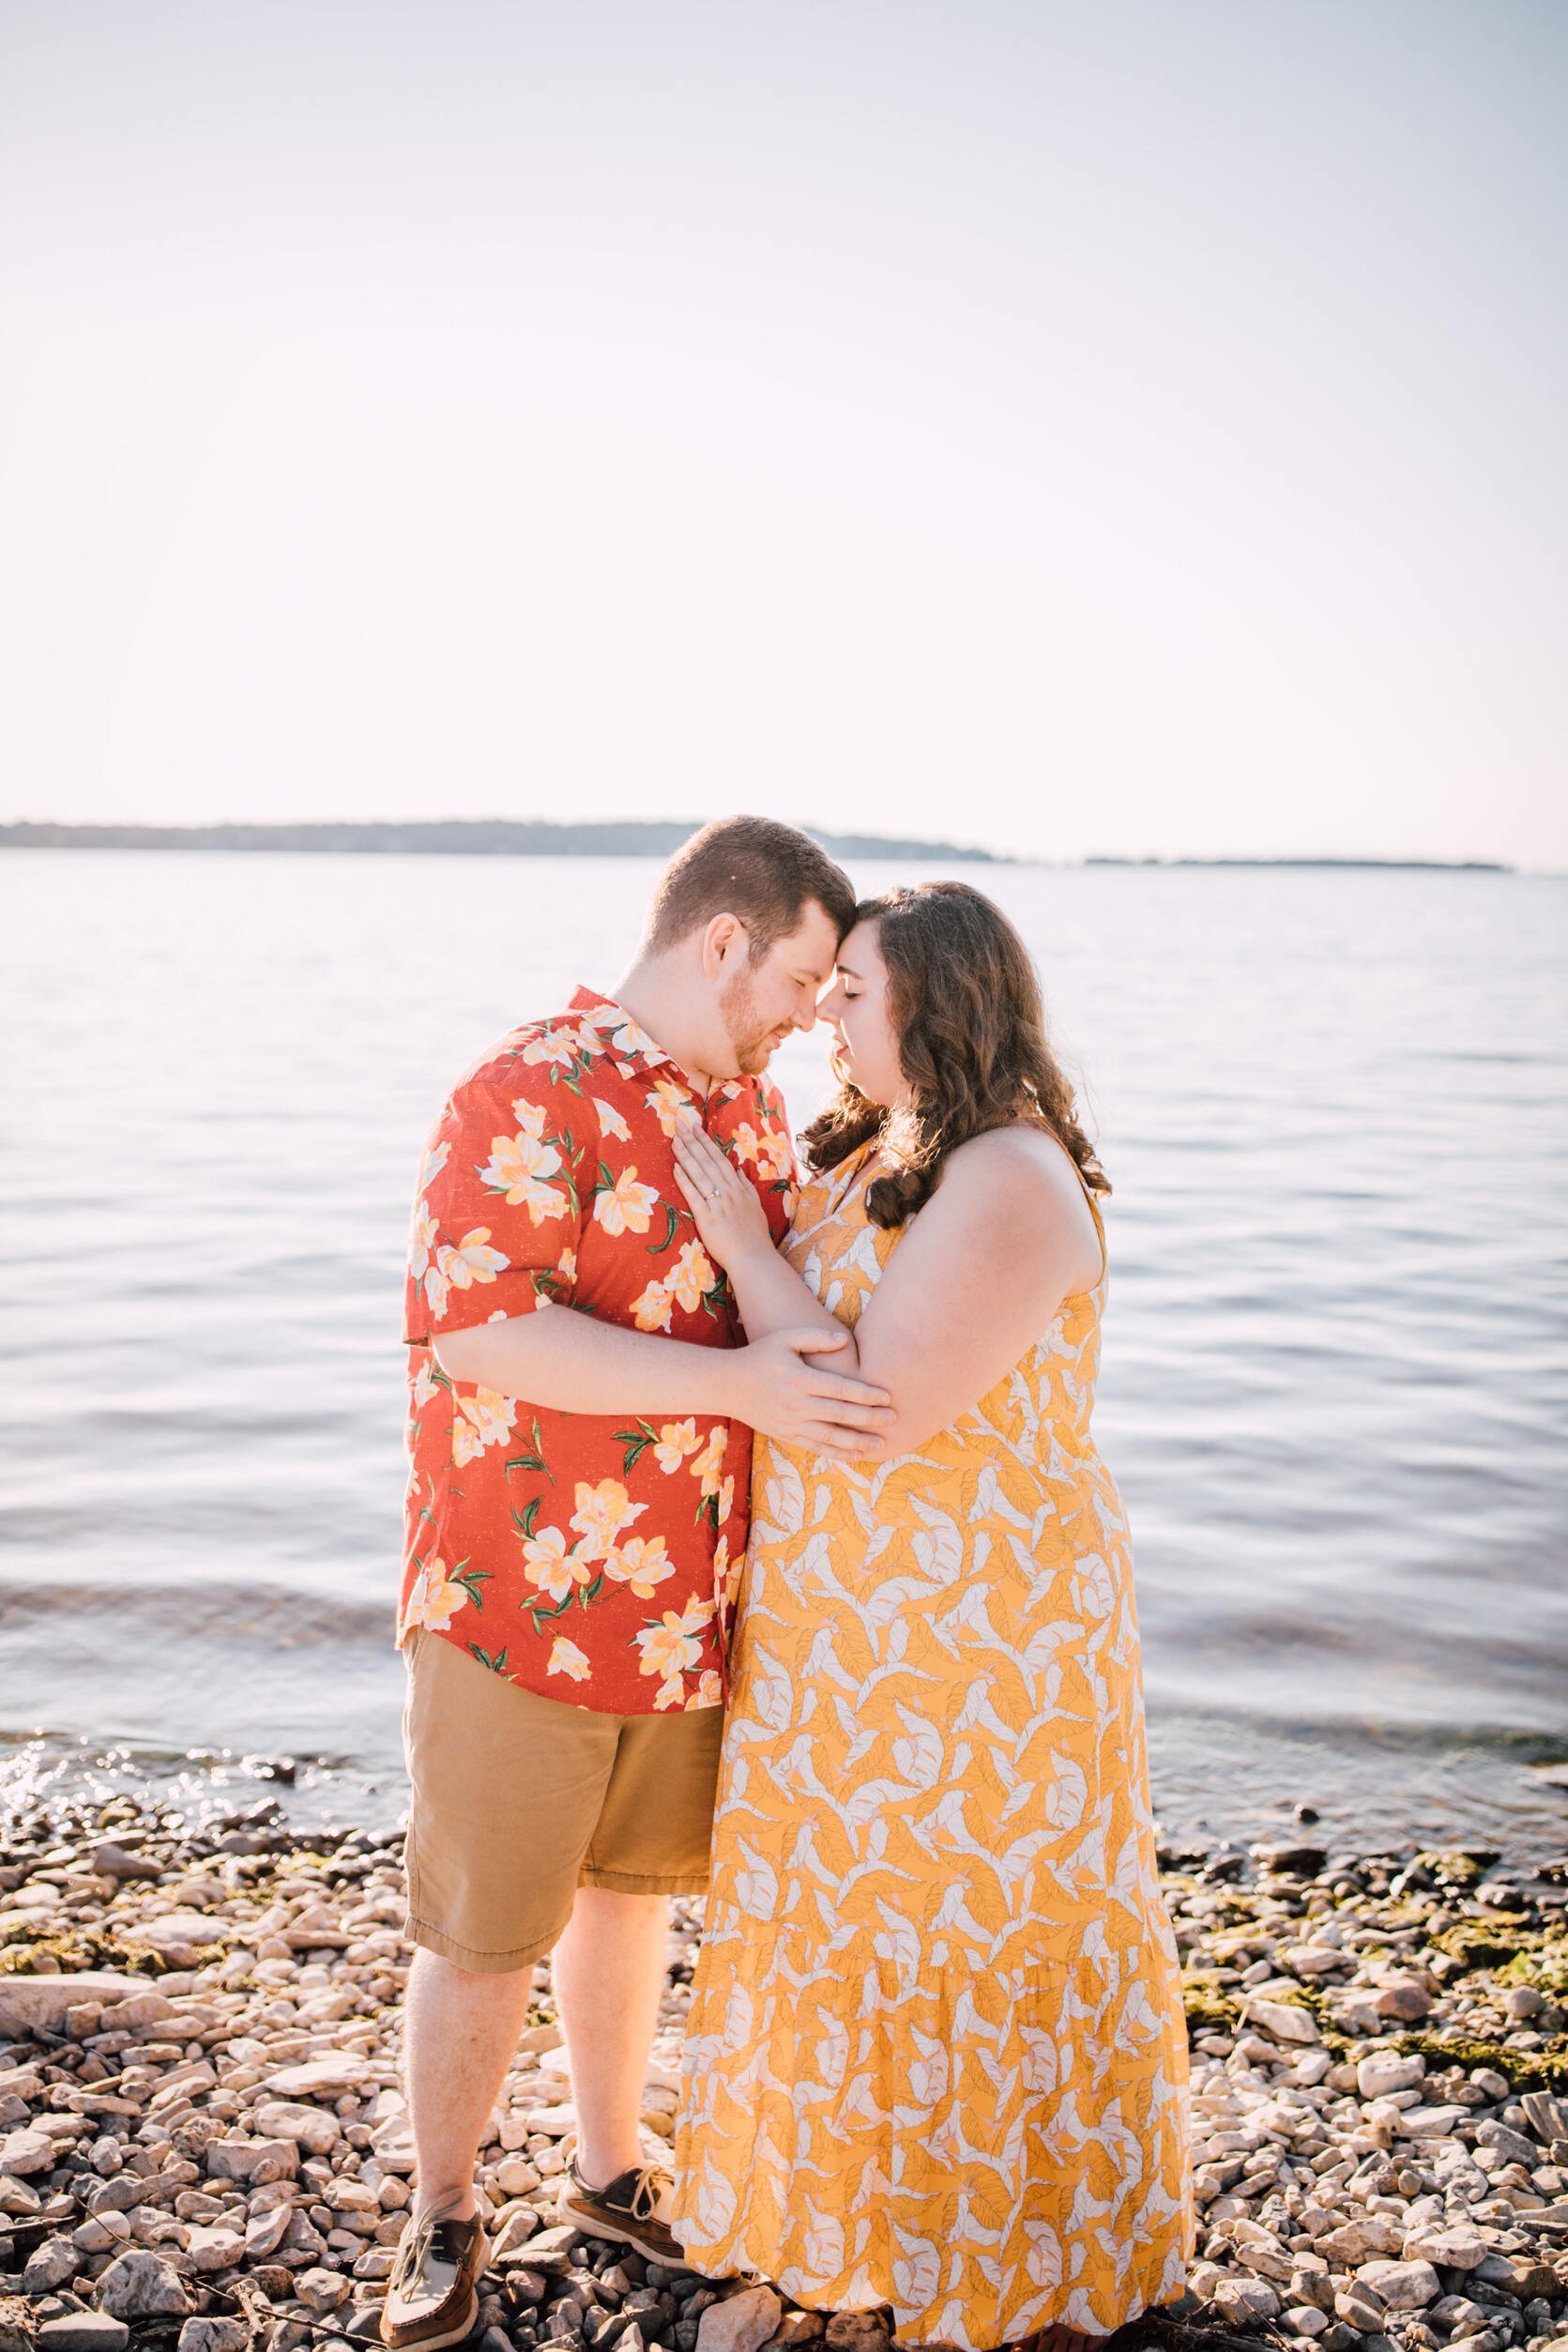  Hanna rests her hand on her fiancé’s chest as they lean in to touch foreheads while standing on a rocky beach for lakefront photography 